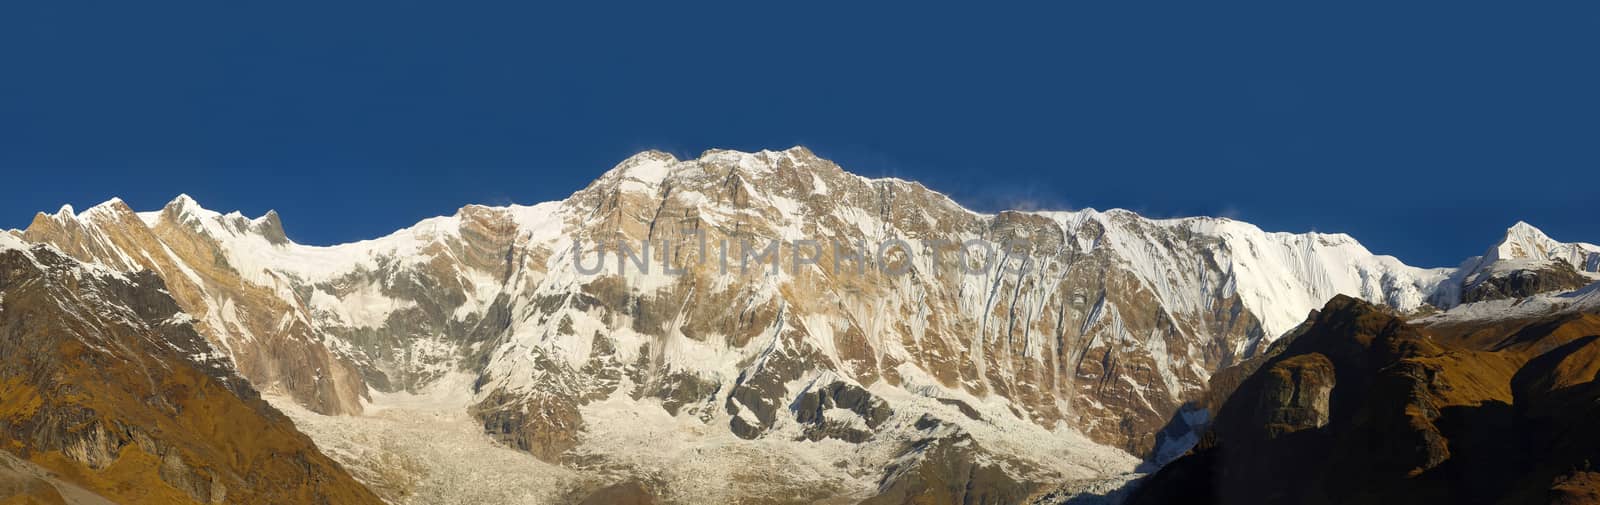 Panorama of the south face of Annapurna I Mountain by anmbph